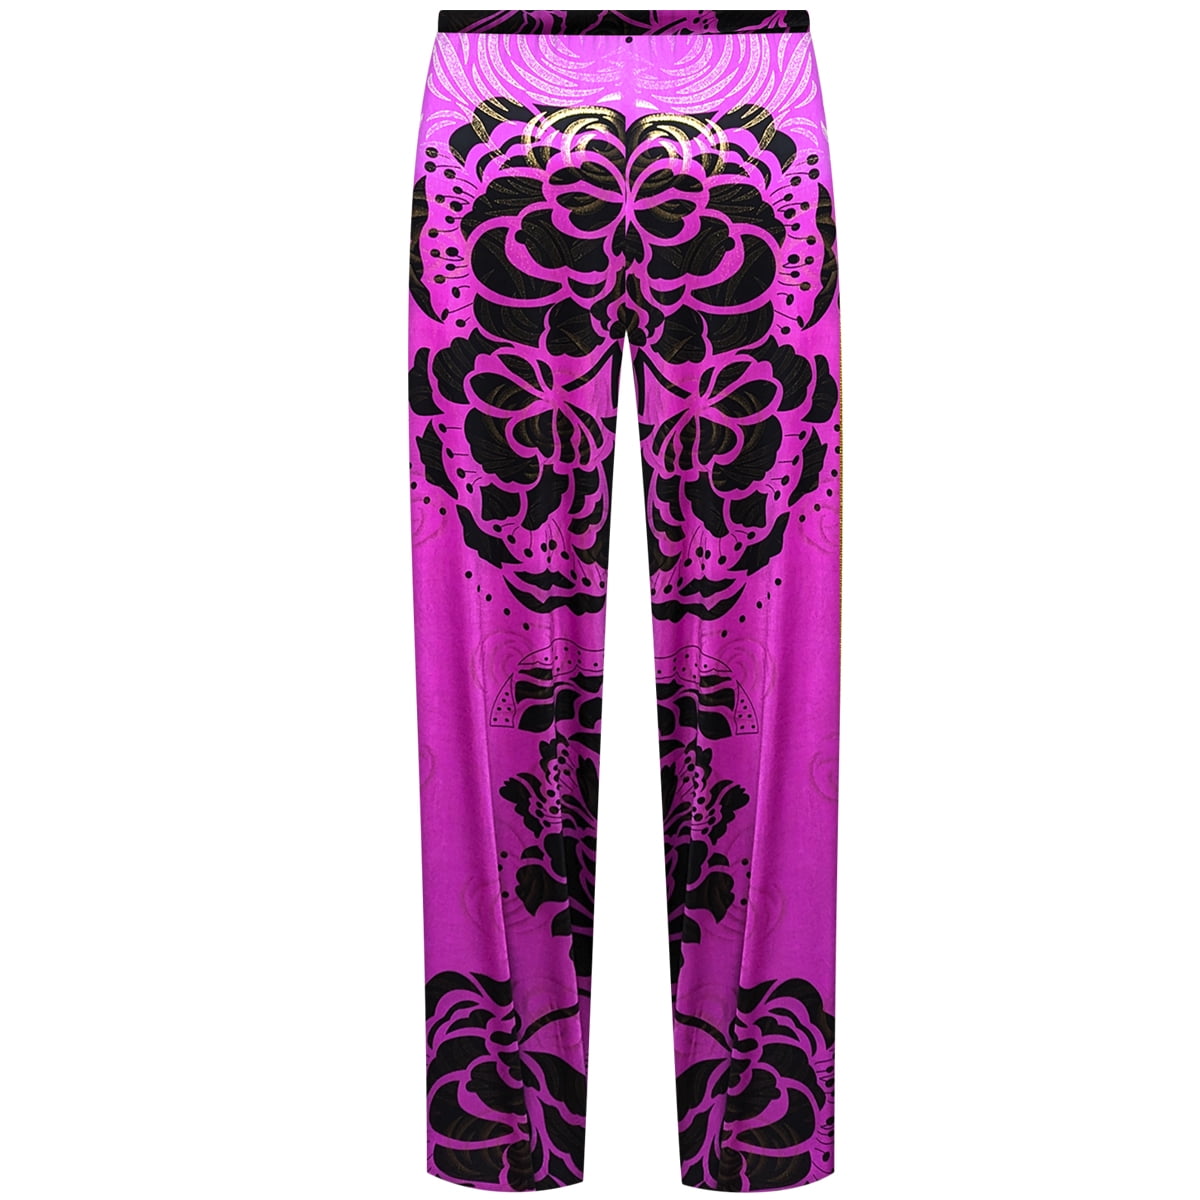 Plus size 0x Black PInk Rose Slinky Tapered pink Pants 